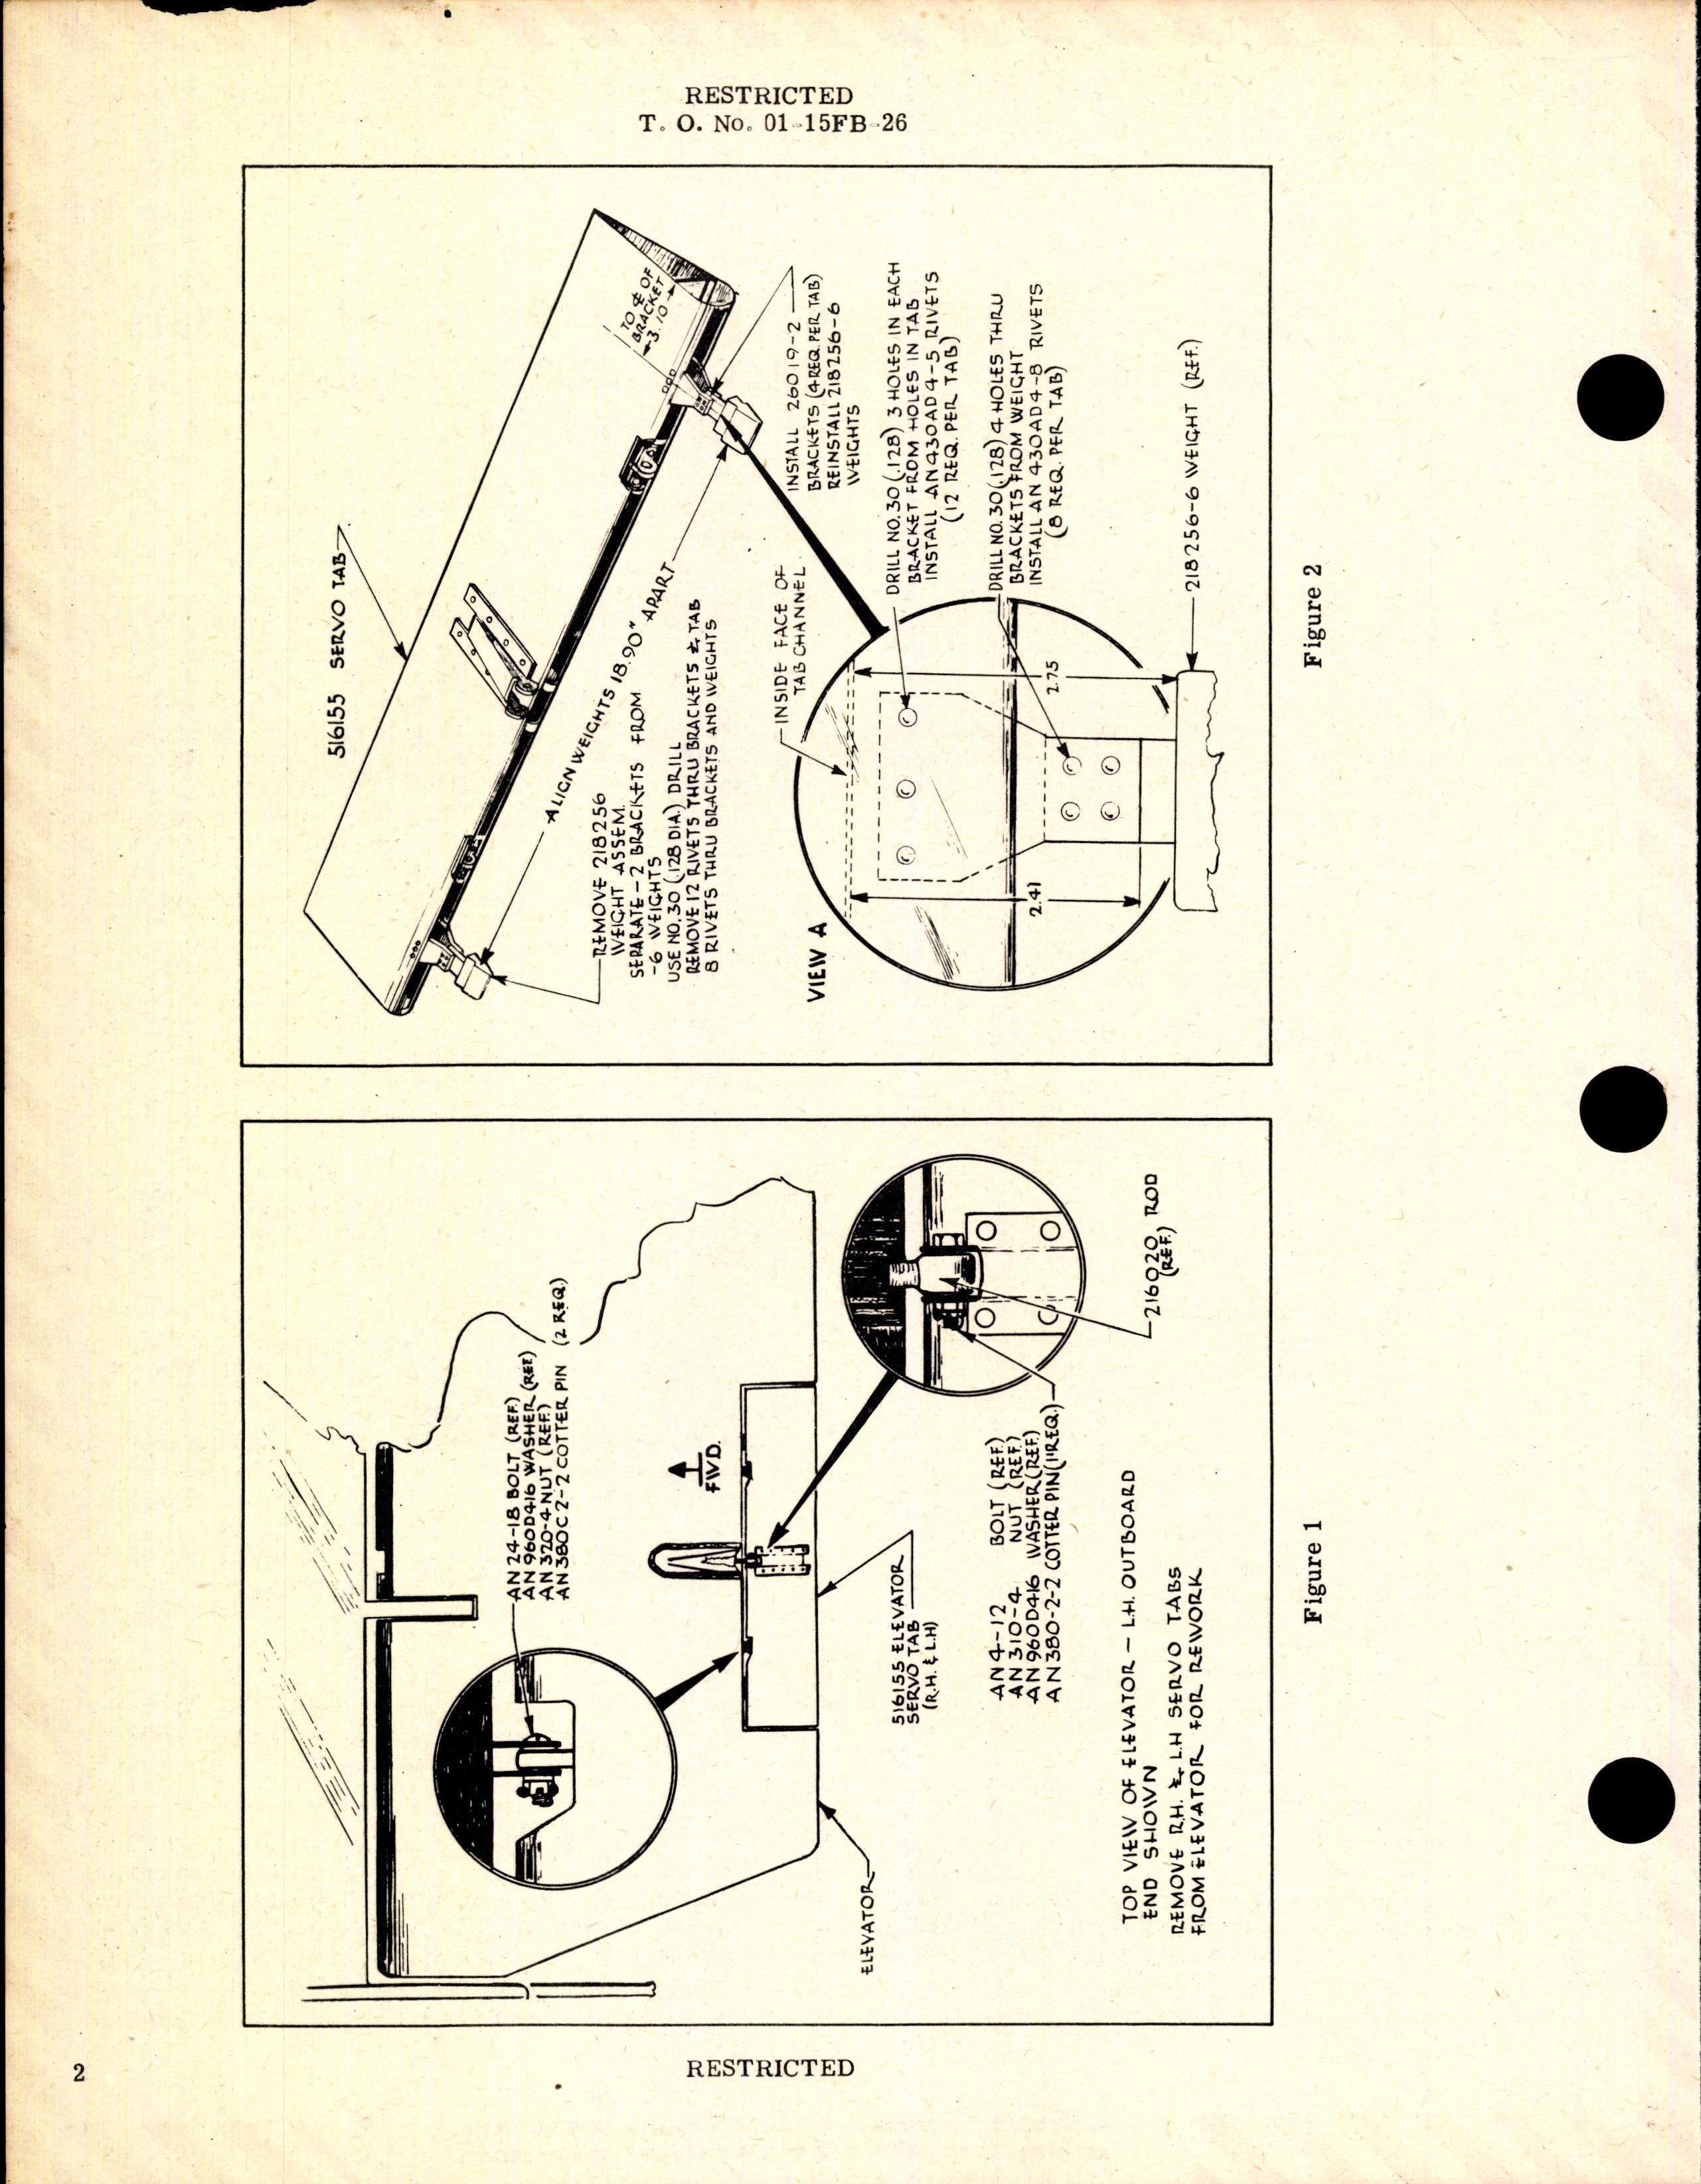 Sample page 2 from AirCorps Library document: Replacement of Dural Servo Tab Weight Brackets & Addition of Compensating Weights in Nose of Elevator for P-61A and P-61B